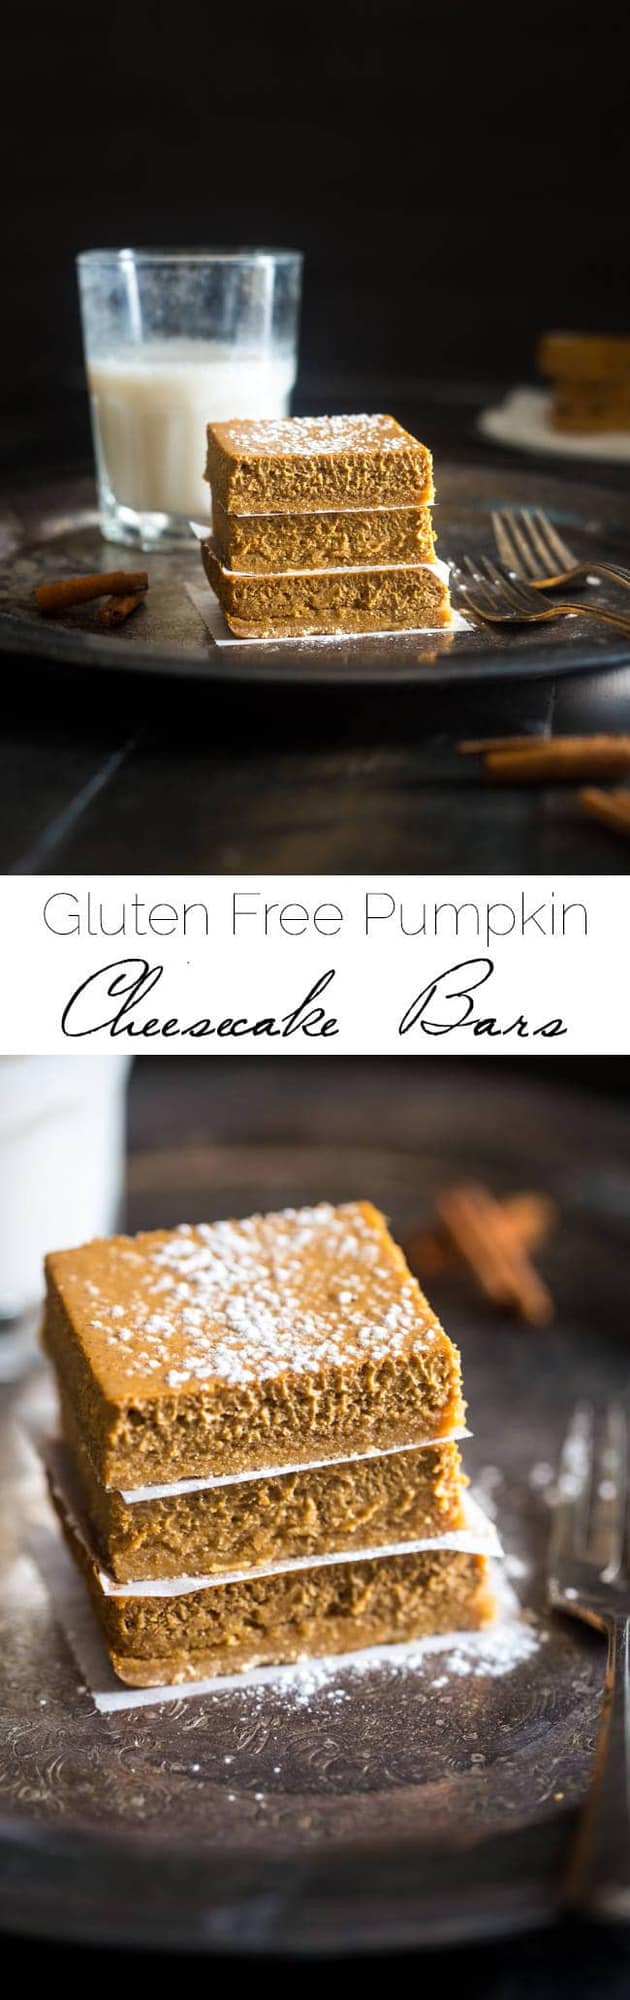 Gluten Free Healthy Pumpkin Cheesecake Bars - These pumpkin cheesecake bars are so creamy, that you'd never know they're secretly healthy, naturally sweetened, gluten free, and only 150 calories! | Foodfaithfitness.com | @FoodFaithFit